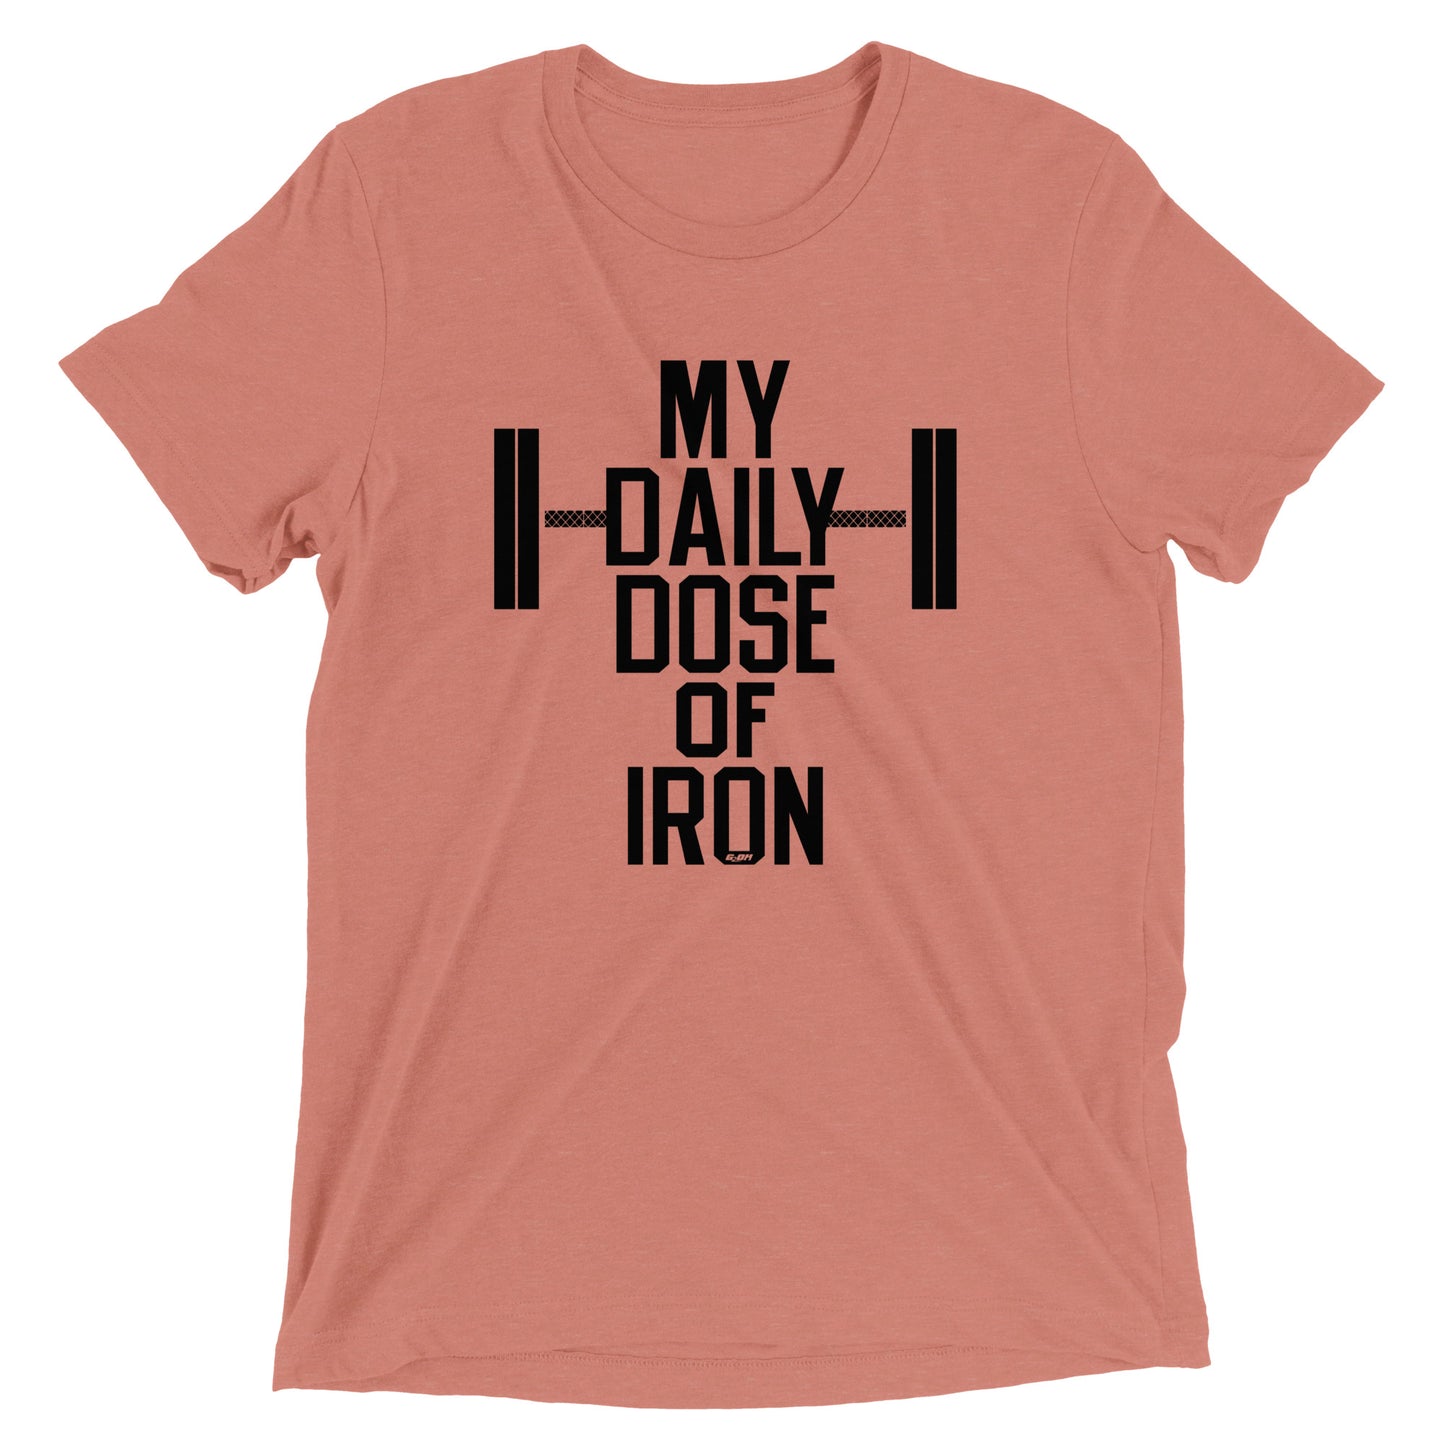 My Daily Dose Of Iron Men's T-Shirt